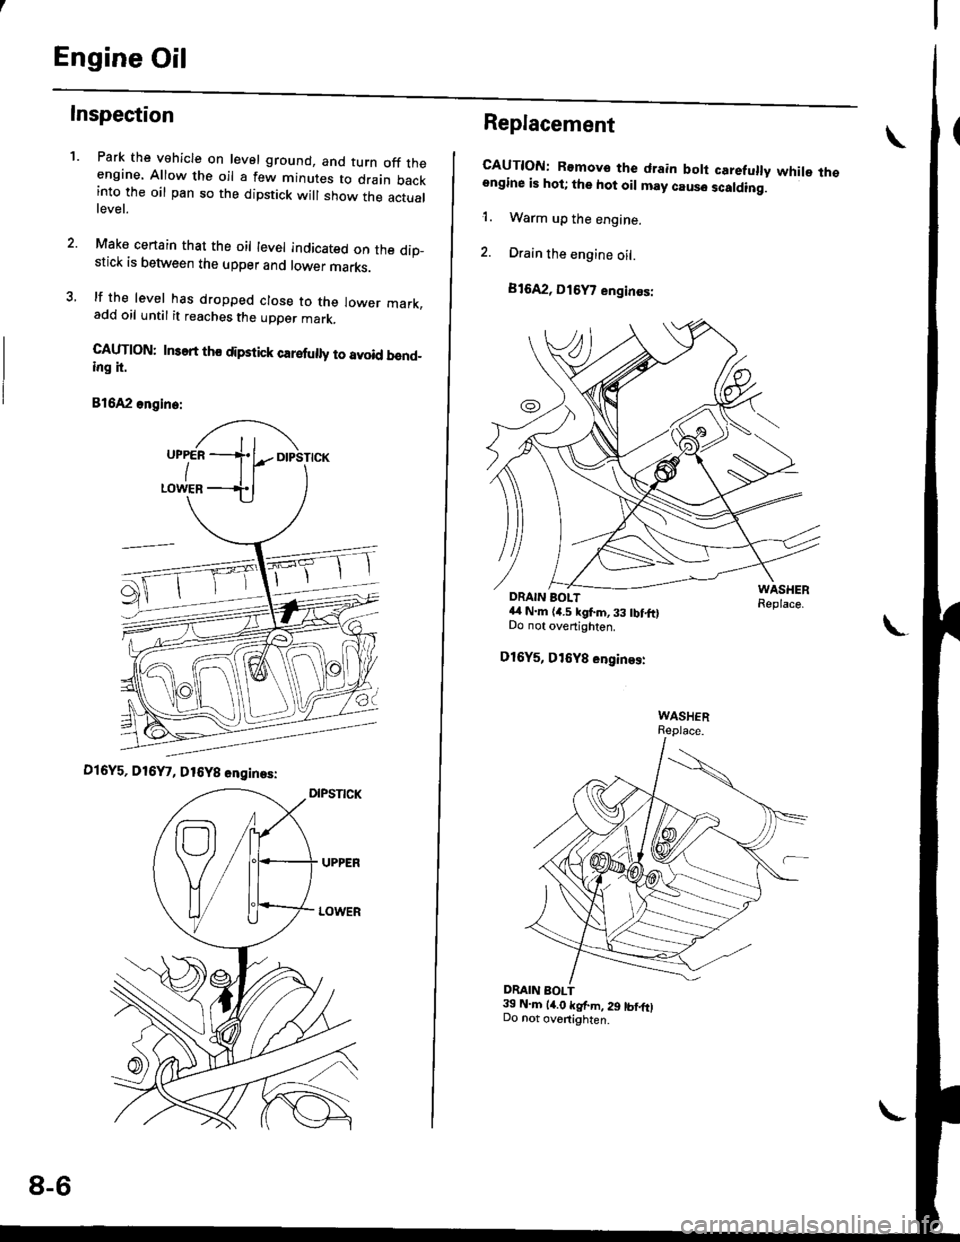 HONDA CIVIC 1996 6.G Workshop Manual Engine Oil
Inspection
1.Park the vehicle on level ground, and turn off theengine. Allow the oil a few minutes to drain backinto the oil pan so the dipstick will show the actuallevel.
Make certain that